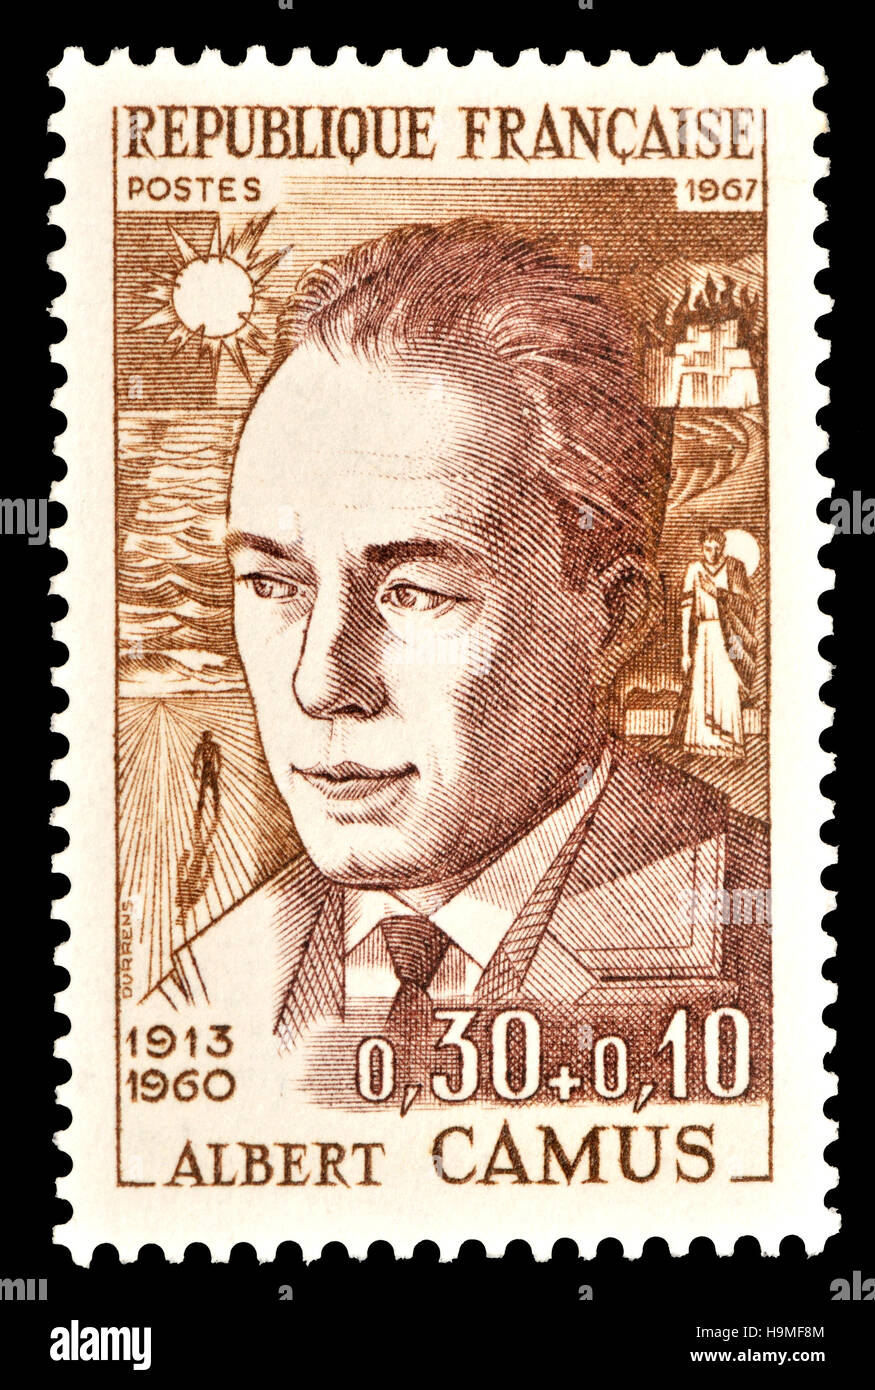 French postage stamp (1967) : Albert Camus (1913-1960) French / Algerian philosopher, author, and journalist Stock Photo